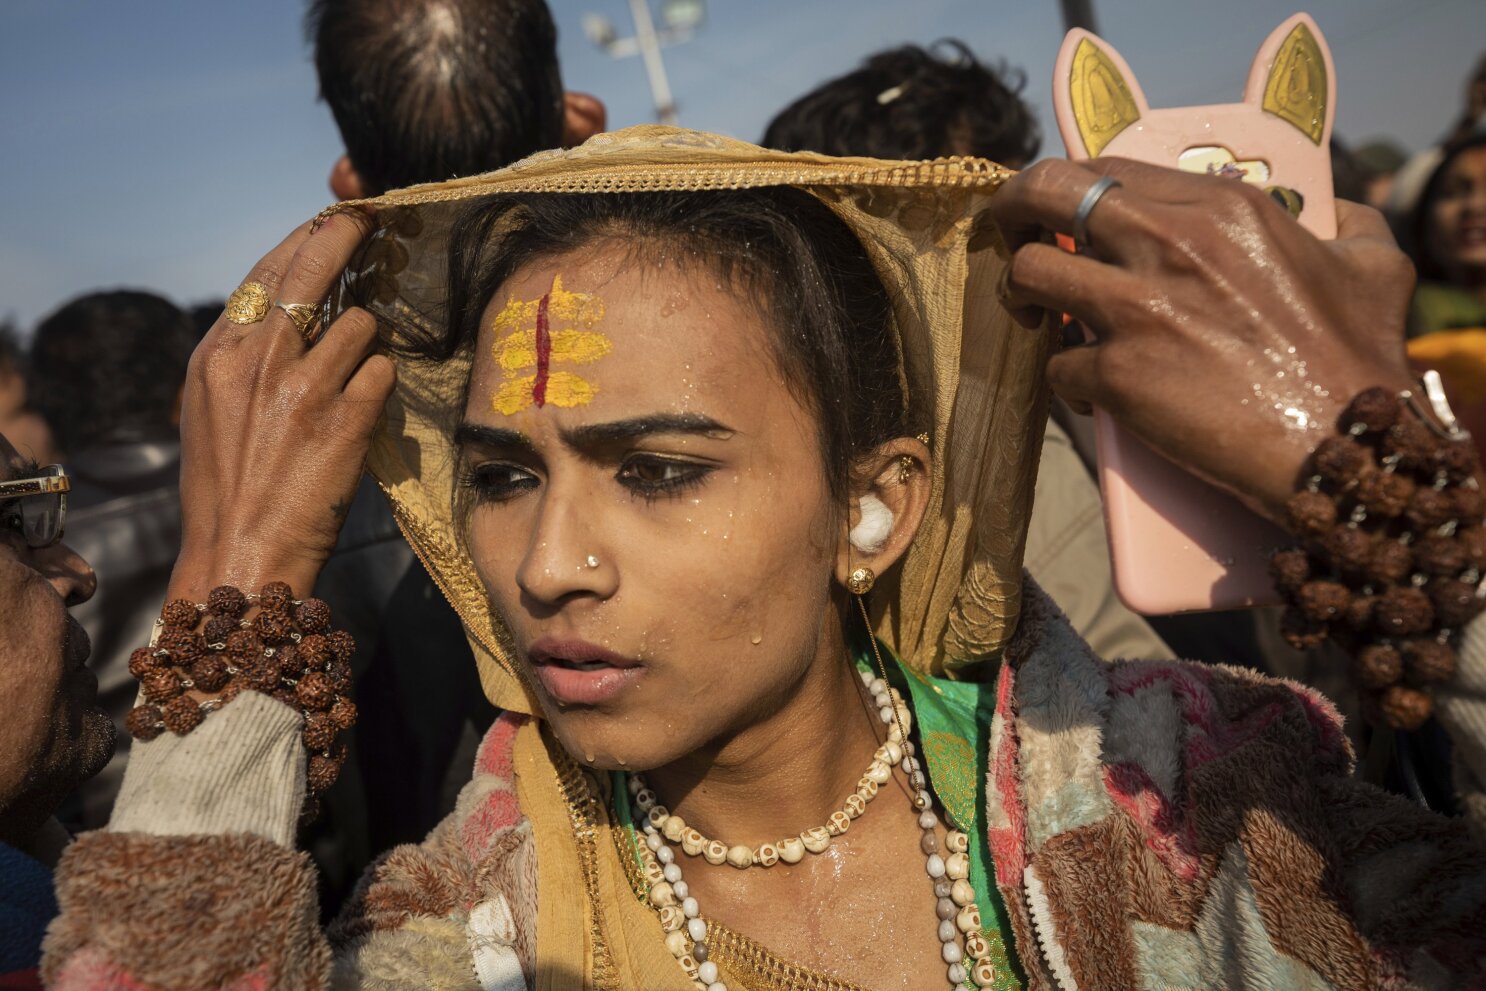 1486px x 991px - Noted Indian transgender activist shakes up Hindu festival | AP News